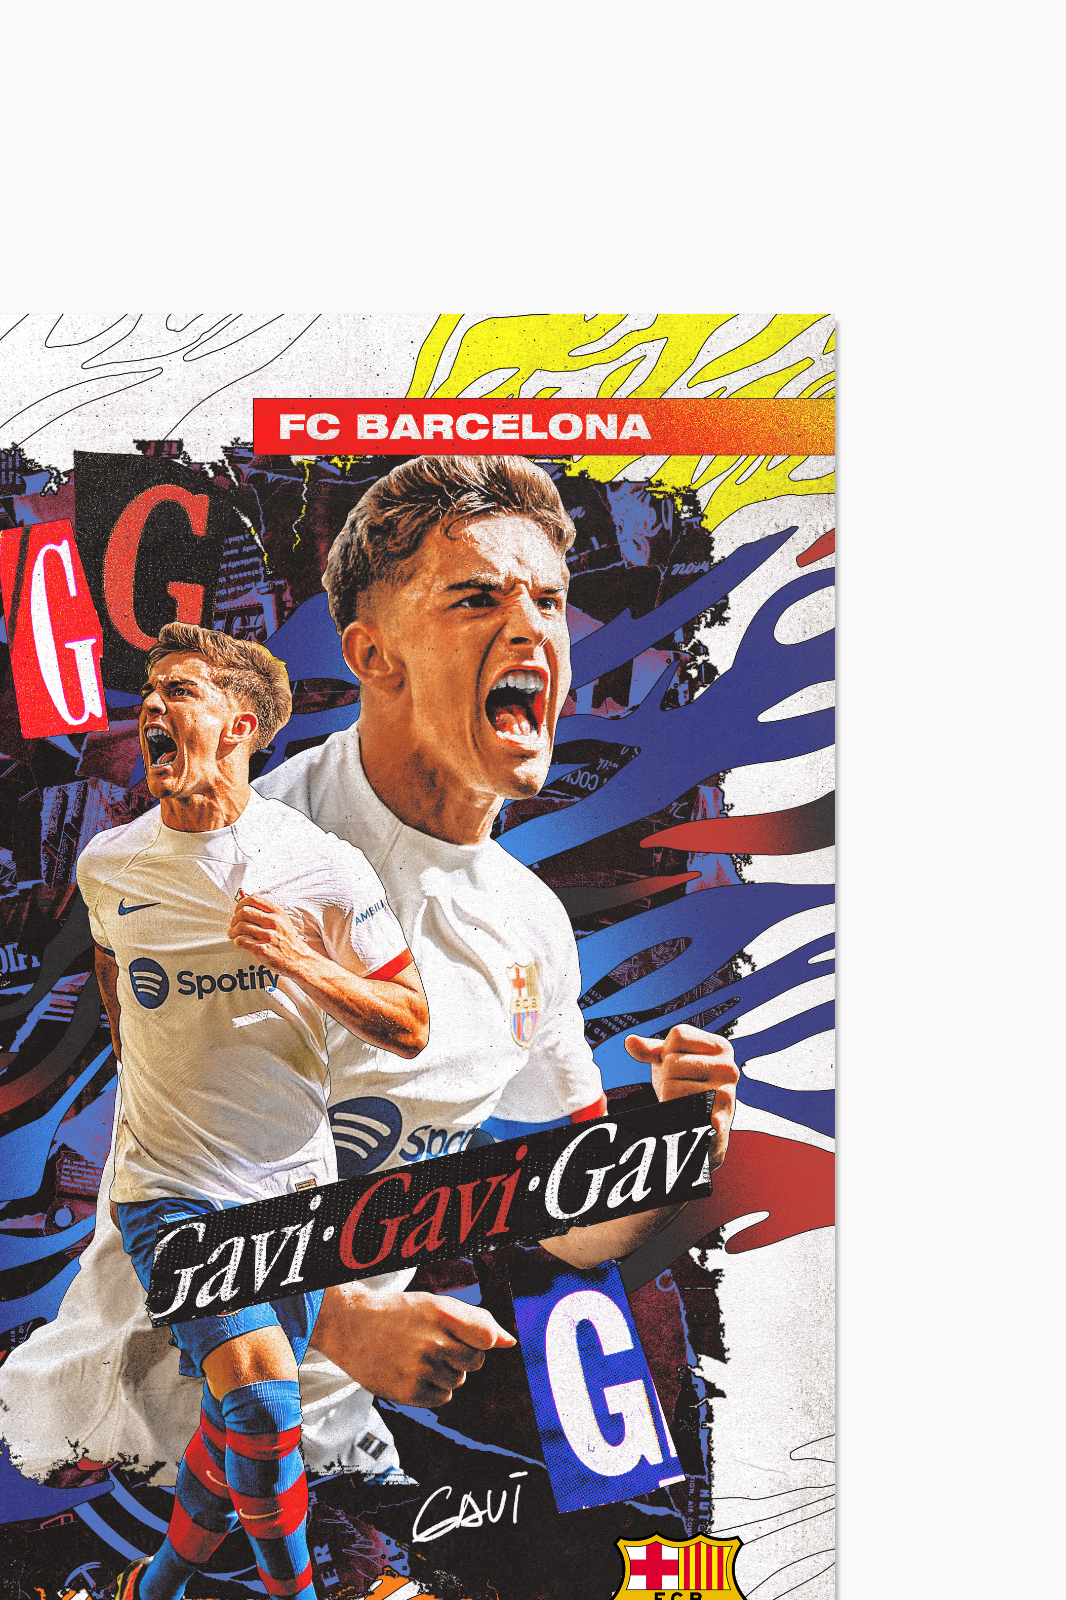 FC Barcelona - Gavi Poster limited to 999